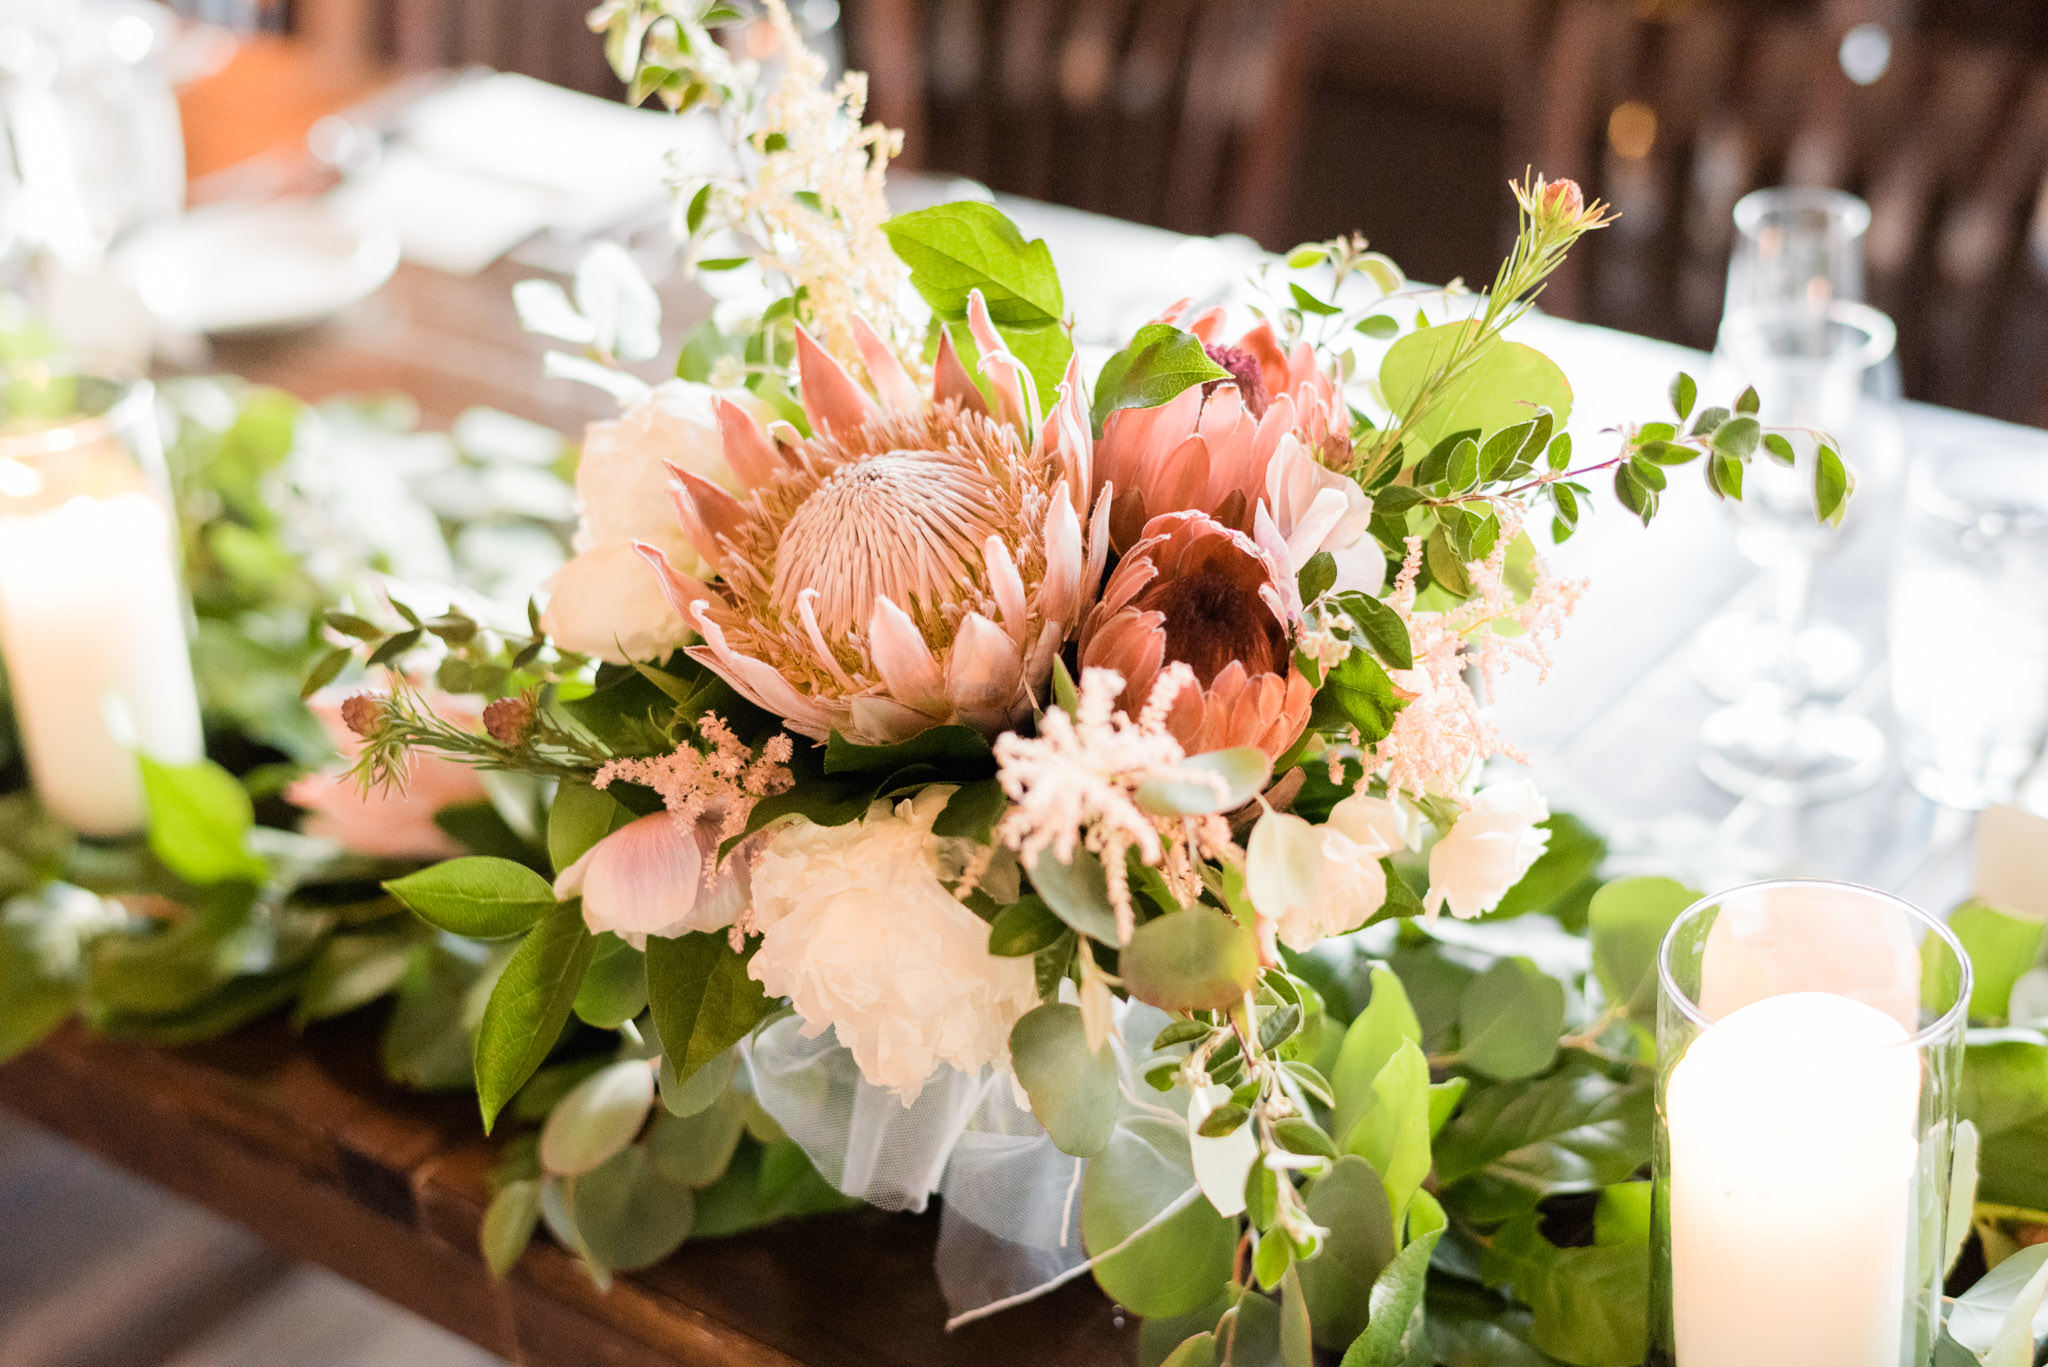 Spring bride's bouquet with blush protea, white anemone, pale pink astilbe, and ivory peonies.